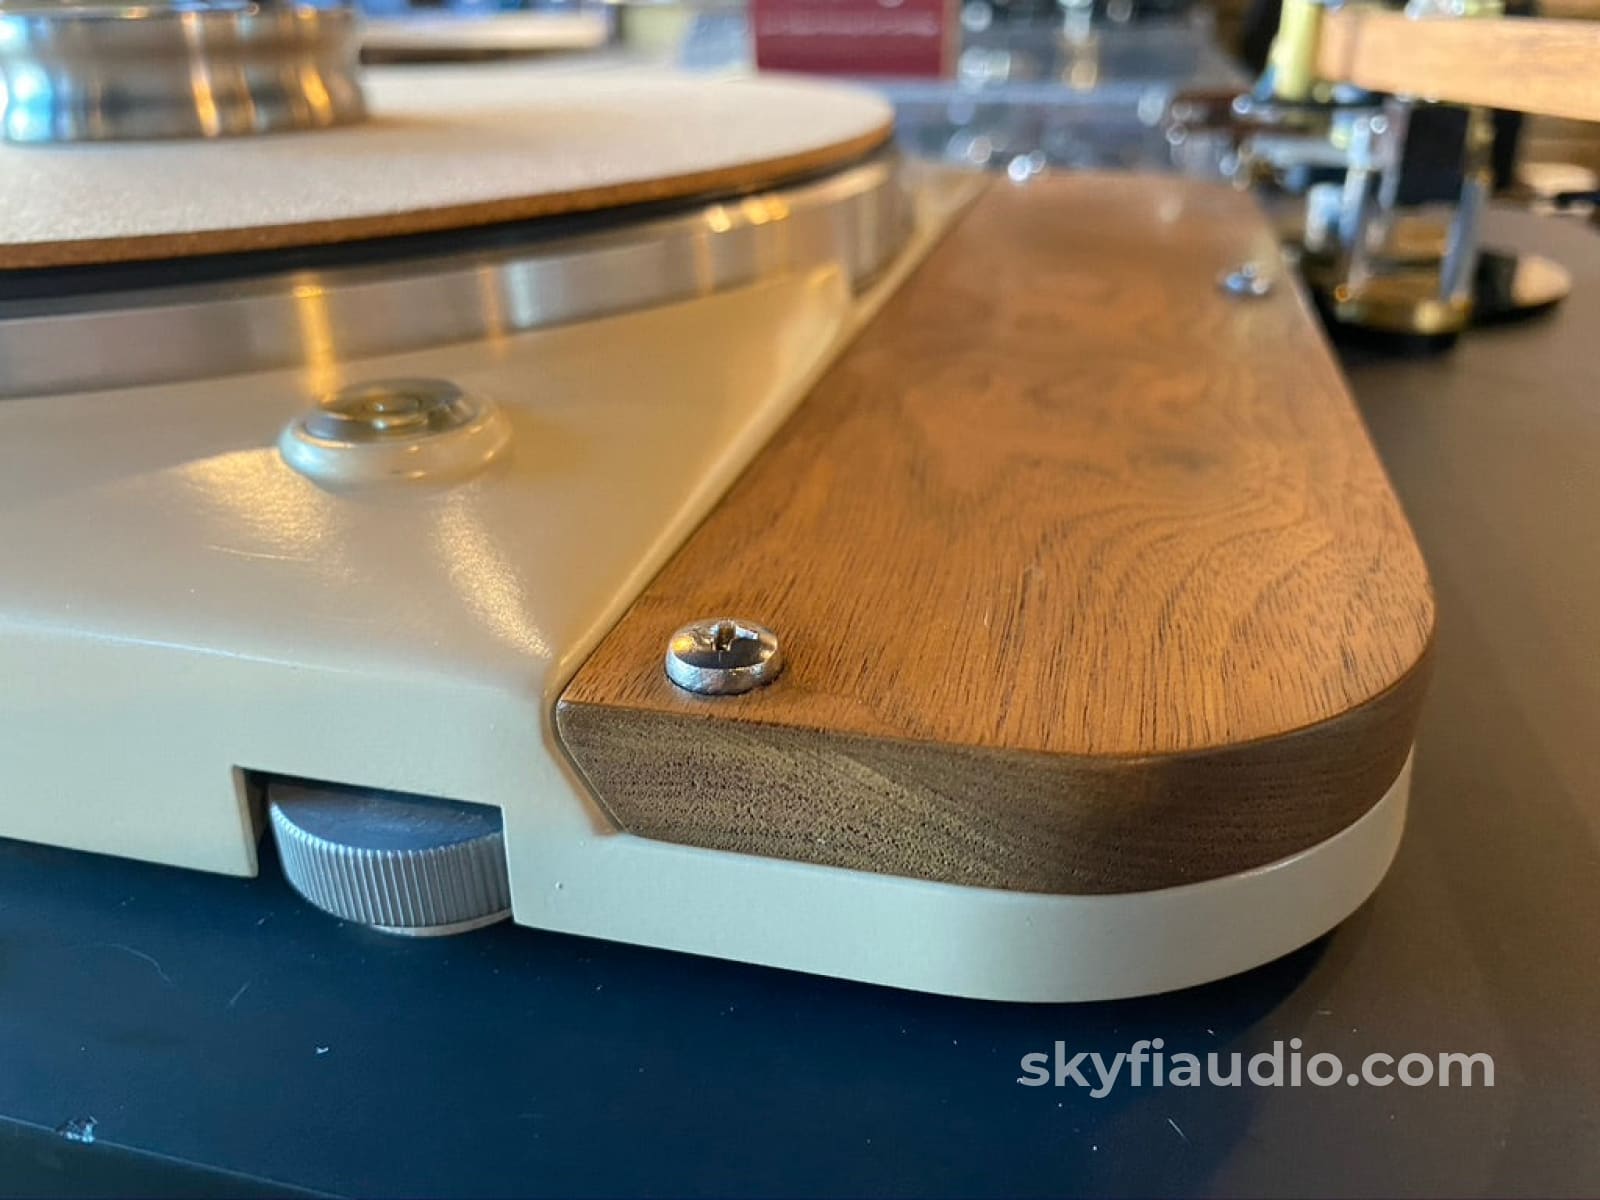 Slate Thorens Td-124 Skyfi Ultimate Build With New Sumiko Cartridge And Power Supply Turntable